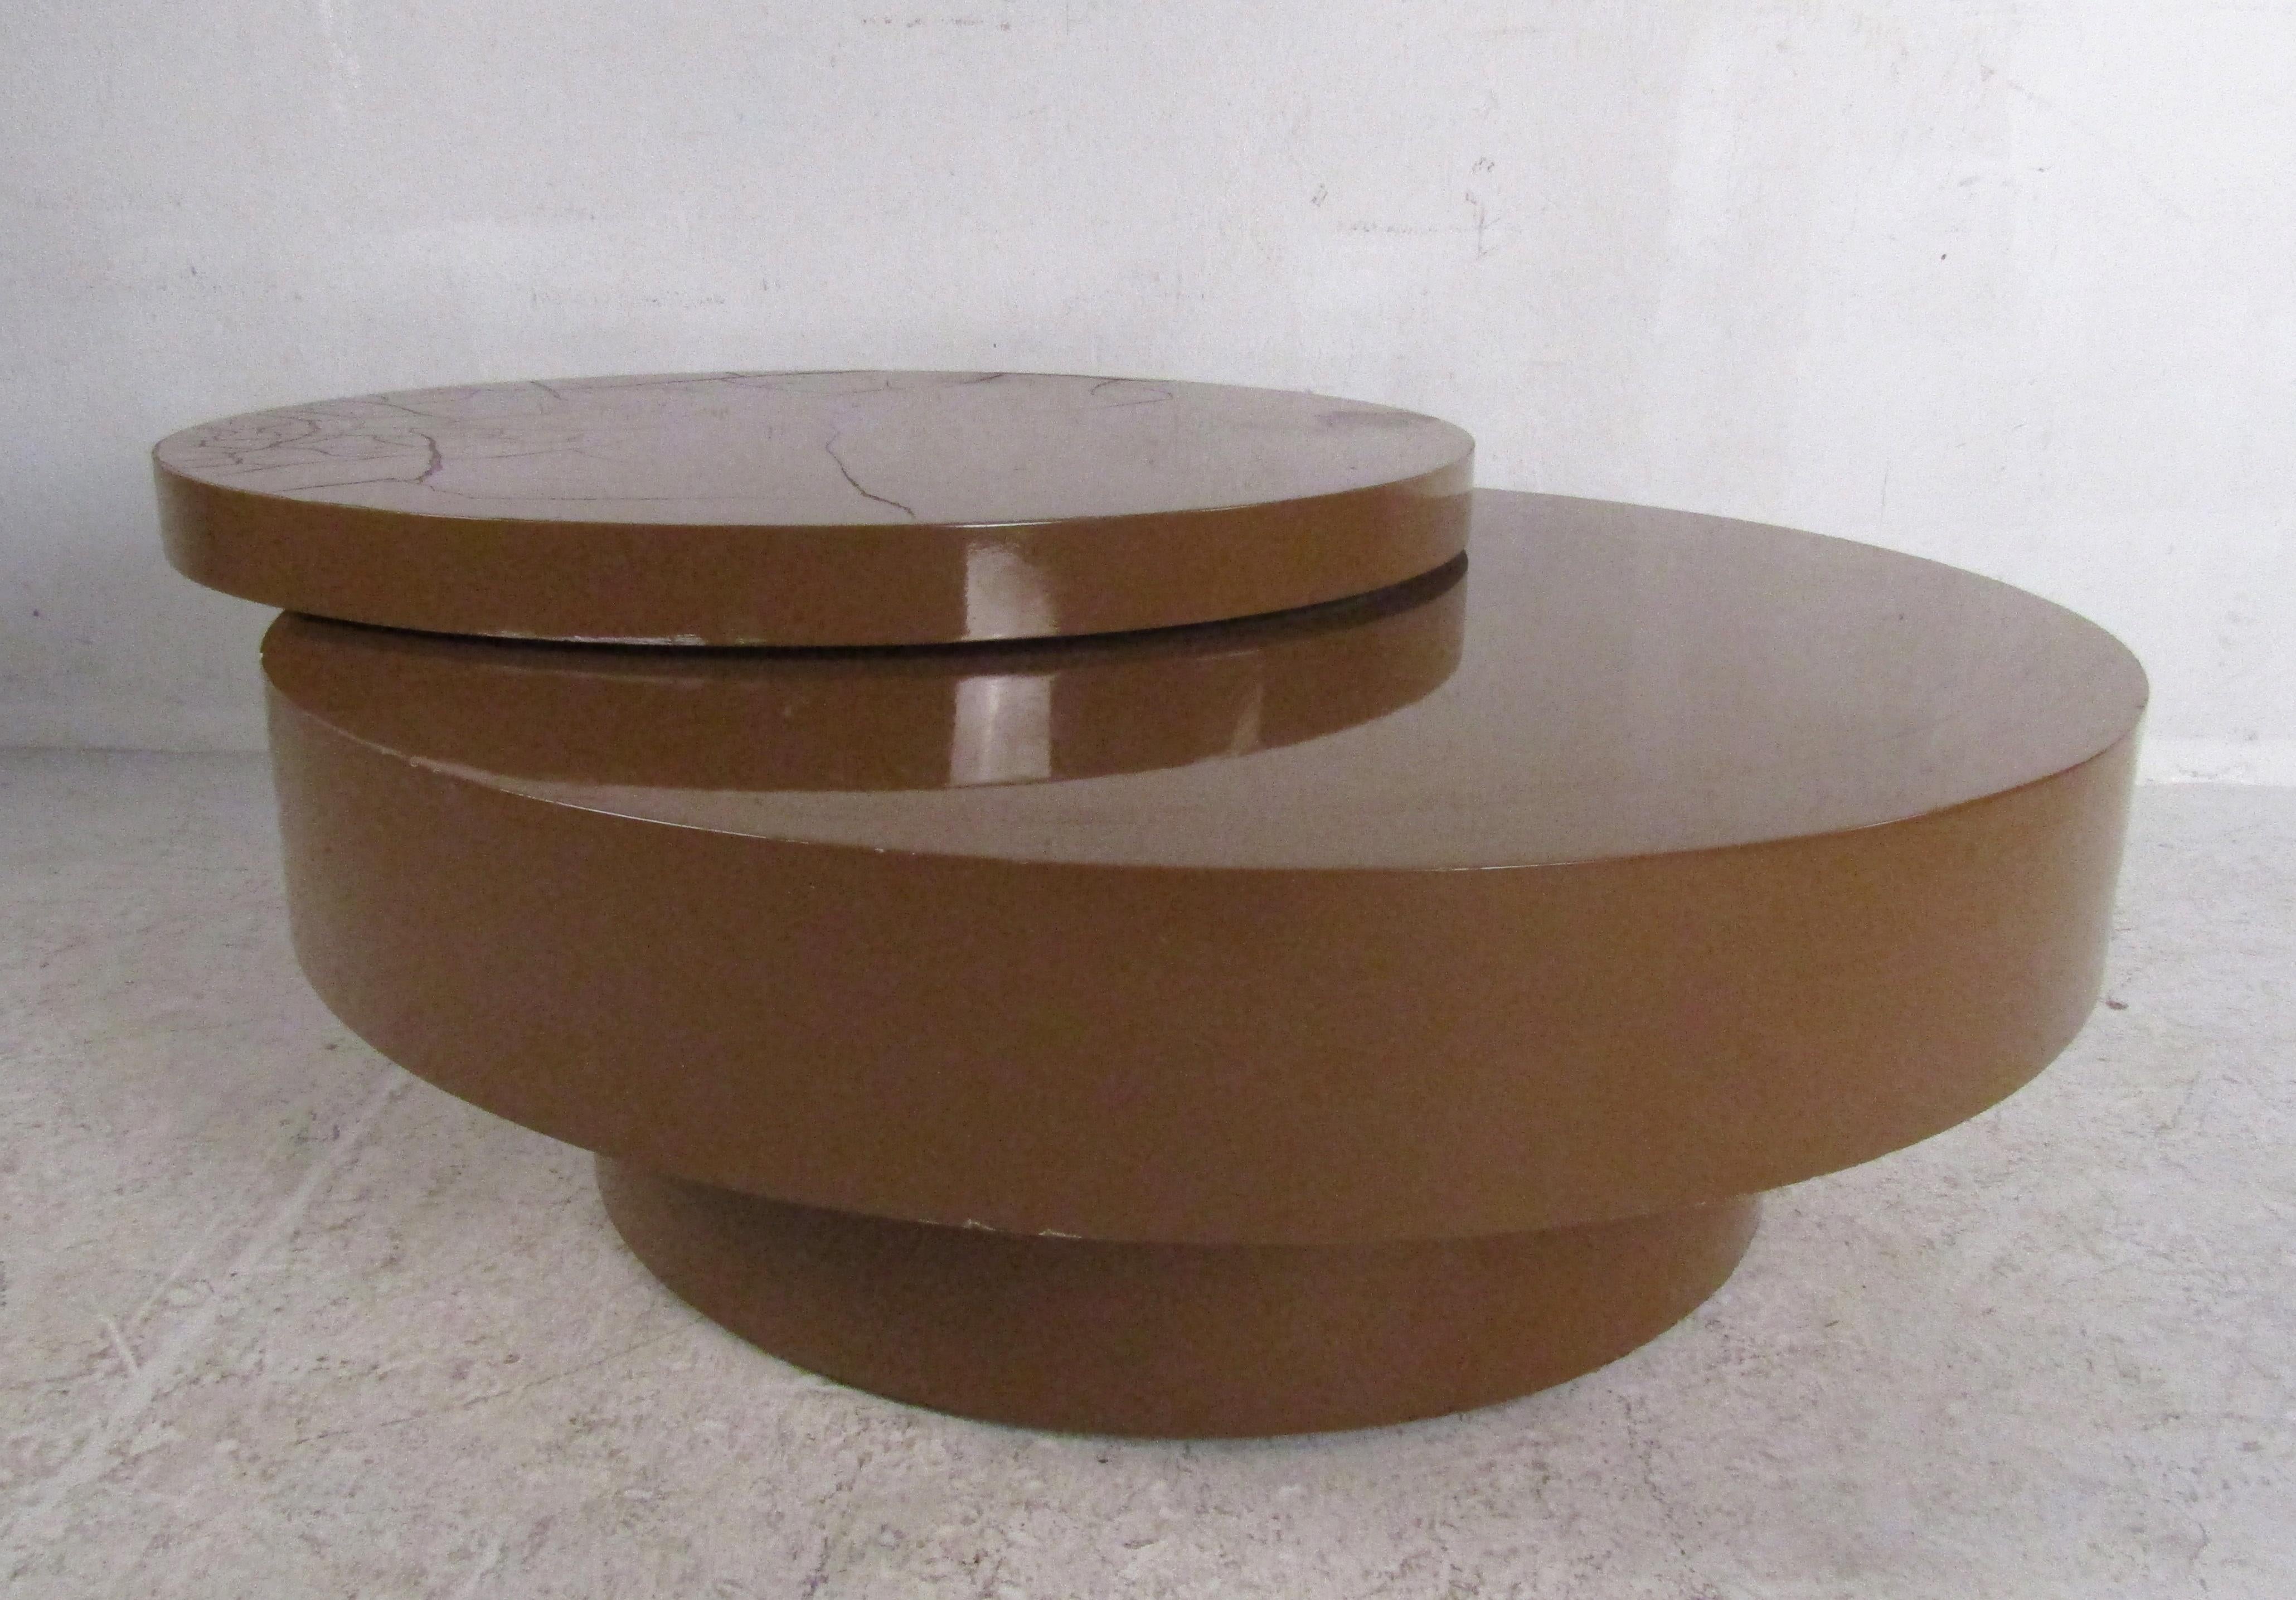 This beautiful vintage modern coffee table swivels from 40 inches wide all the way to 49 inches wide. A brown lacquered finish adds to the mid-century appeal. A versatile pedestal-style base makes this unusual cocktail table the perfect addition to